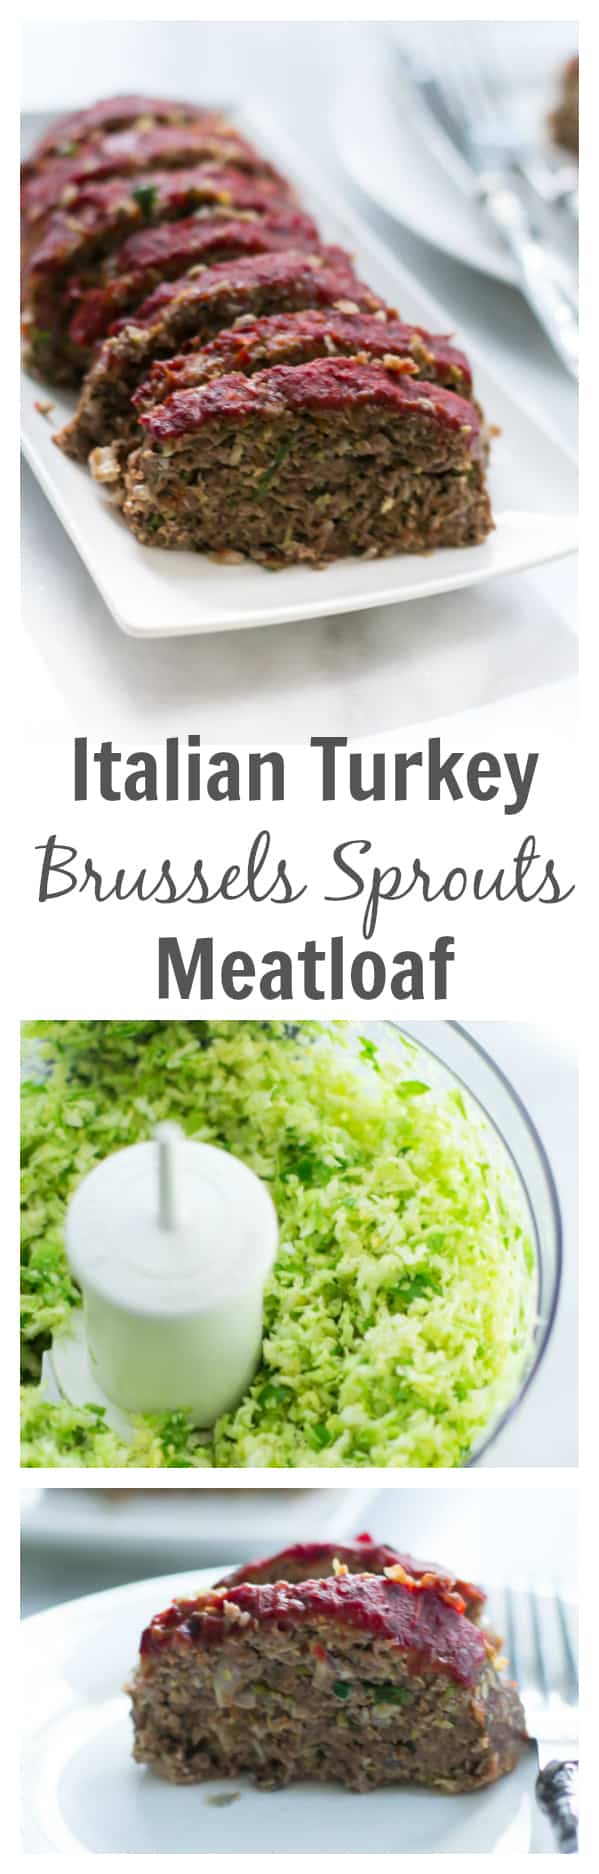 Turkey Brussels Sprout Meatloaf - This Italian Turkey & Brussels Sprouts Meatloaf is made healthier by using extra-lean Italian Turkey and shredded brussels sprouts. It is also very moist and flavourful. 